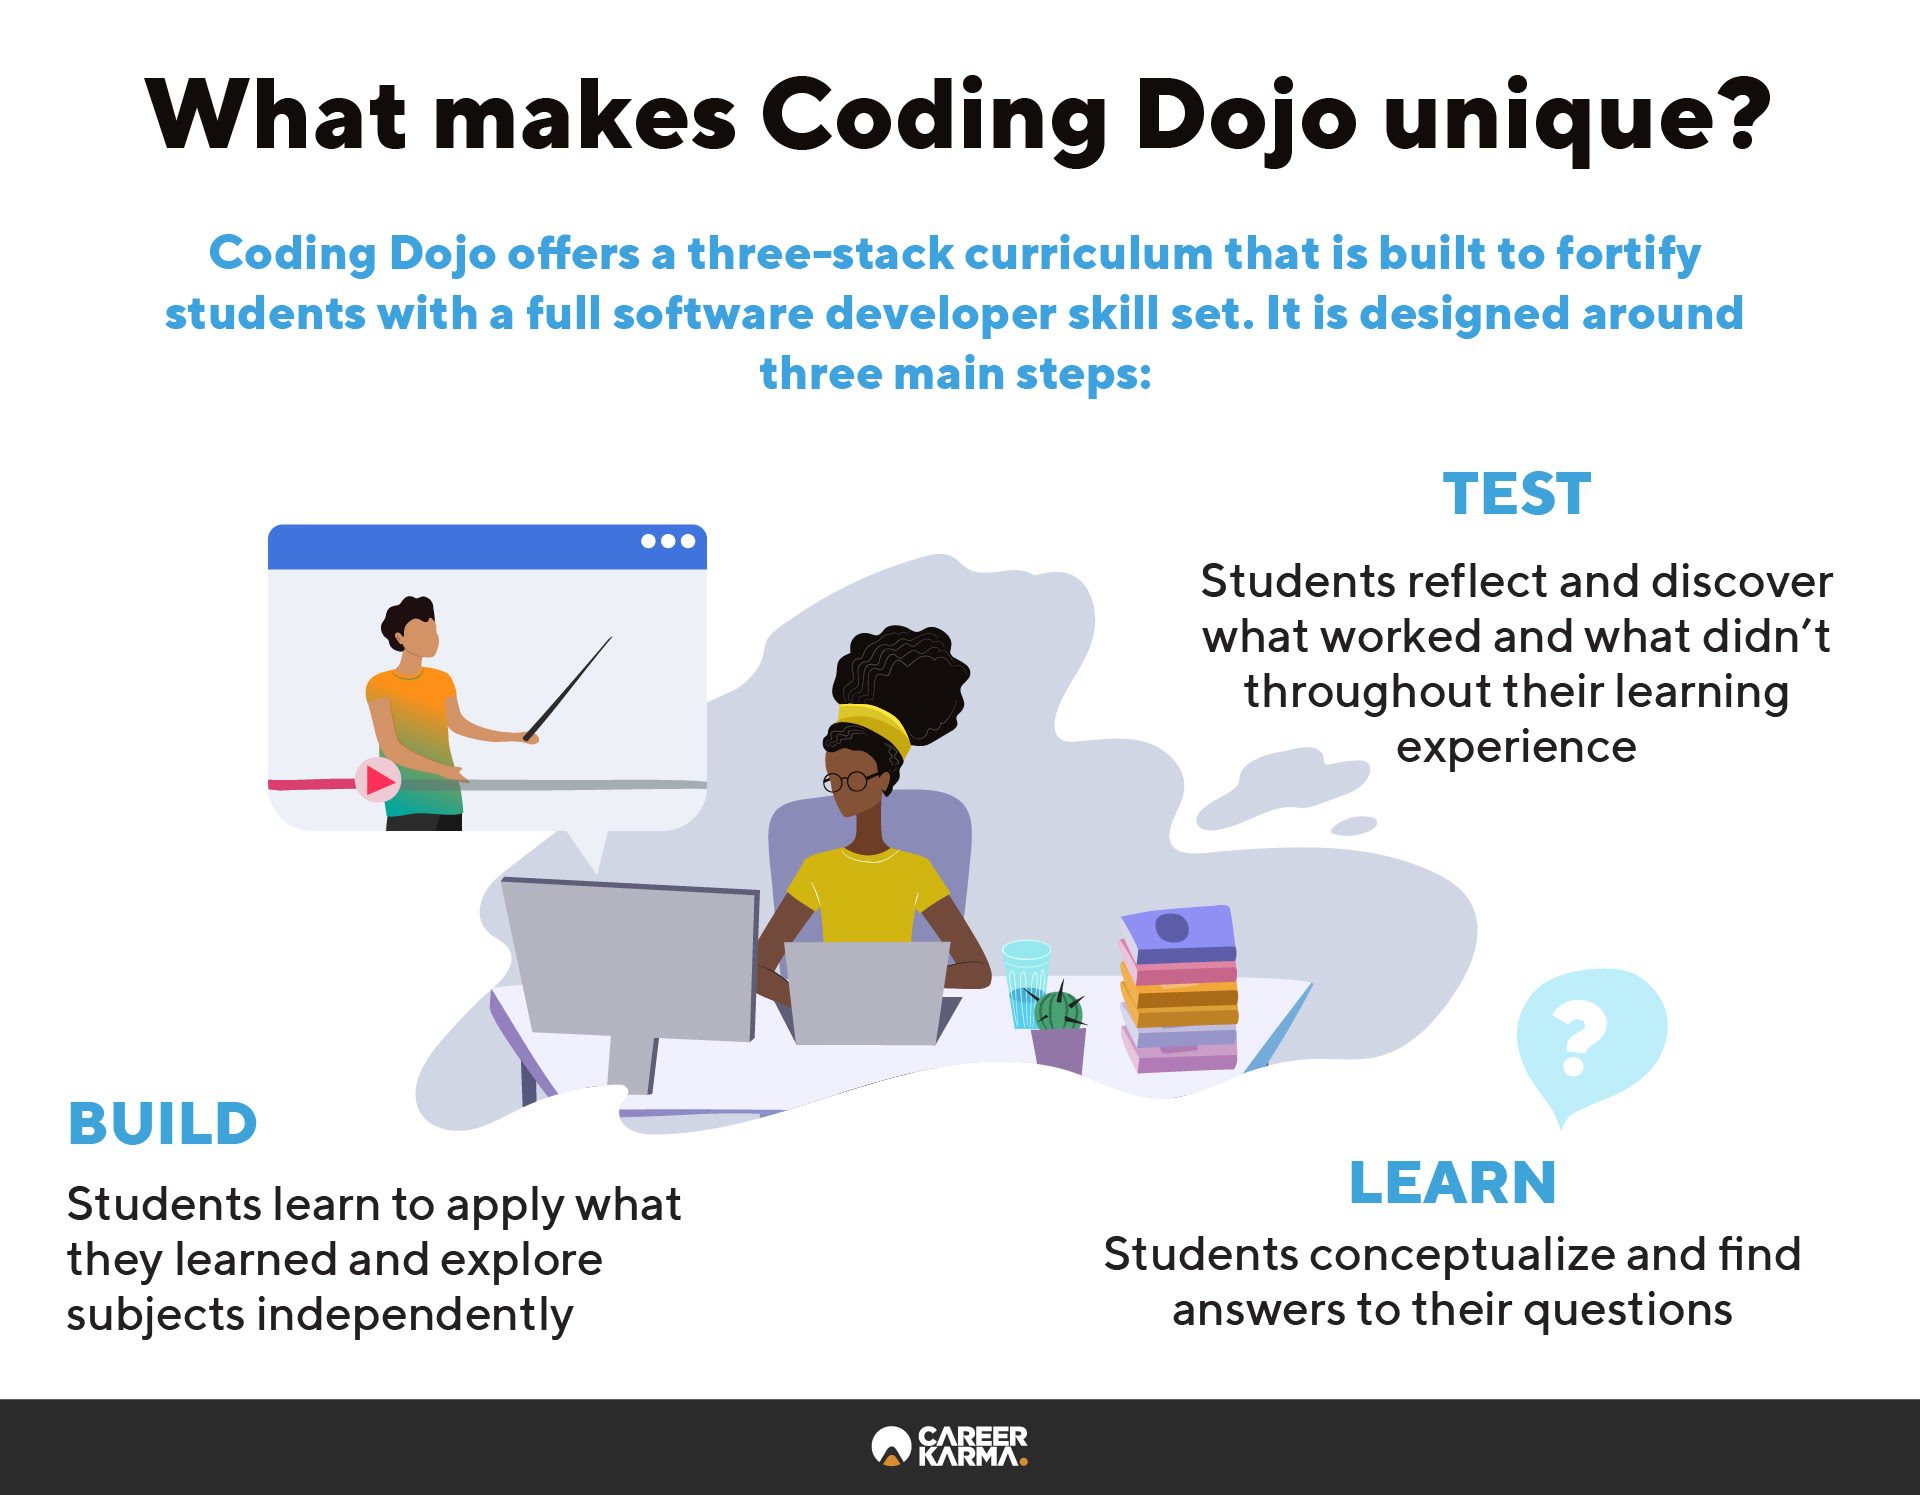 An infographic covering what makes Coding Dojo’s curriculum unique